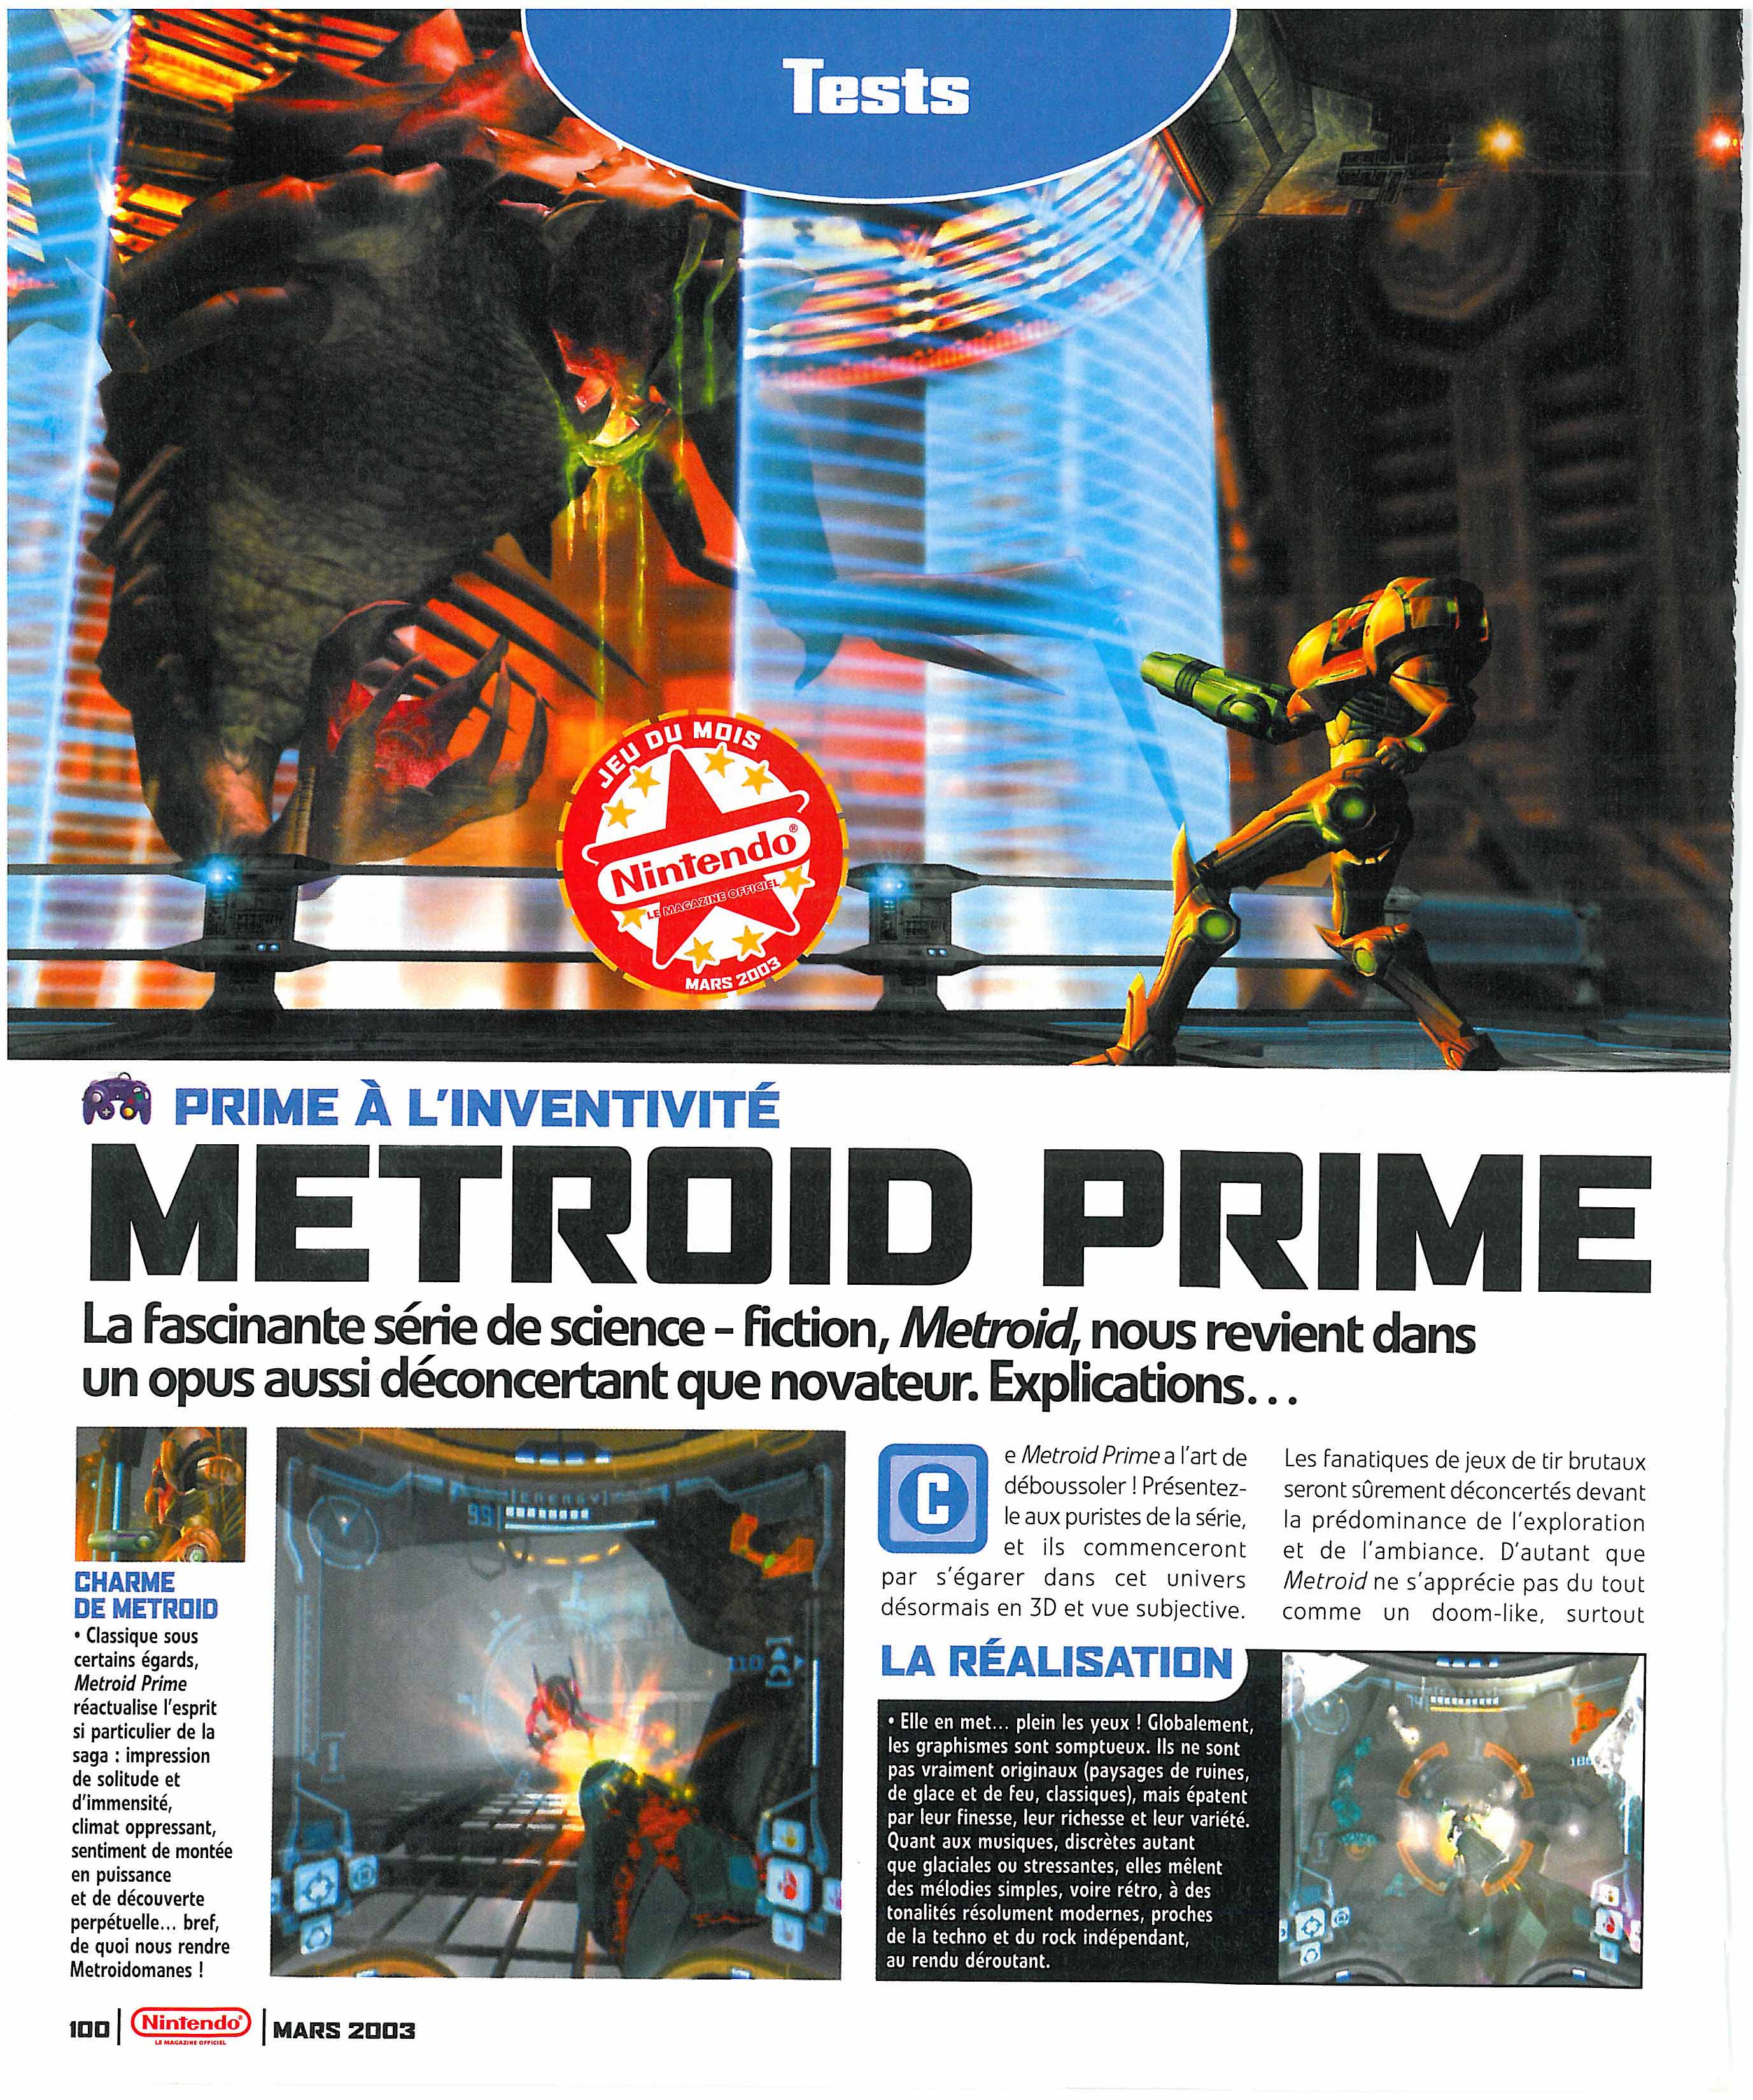 [TEST] Metroid Prime Remastered (Switch) Le%20Magazine%20Officiel%20Nintendo%20N%C2%B0010%20-%20Page%20100%20%28Mars%202003%29